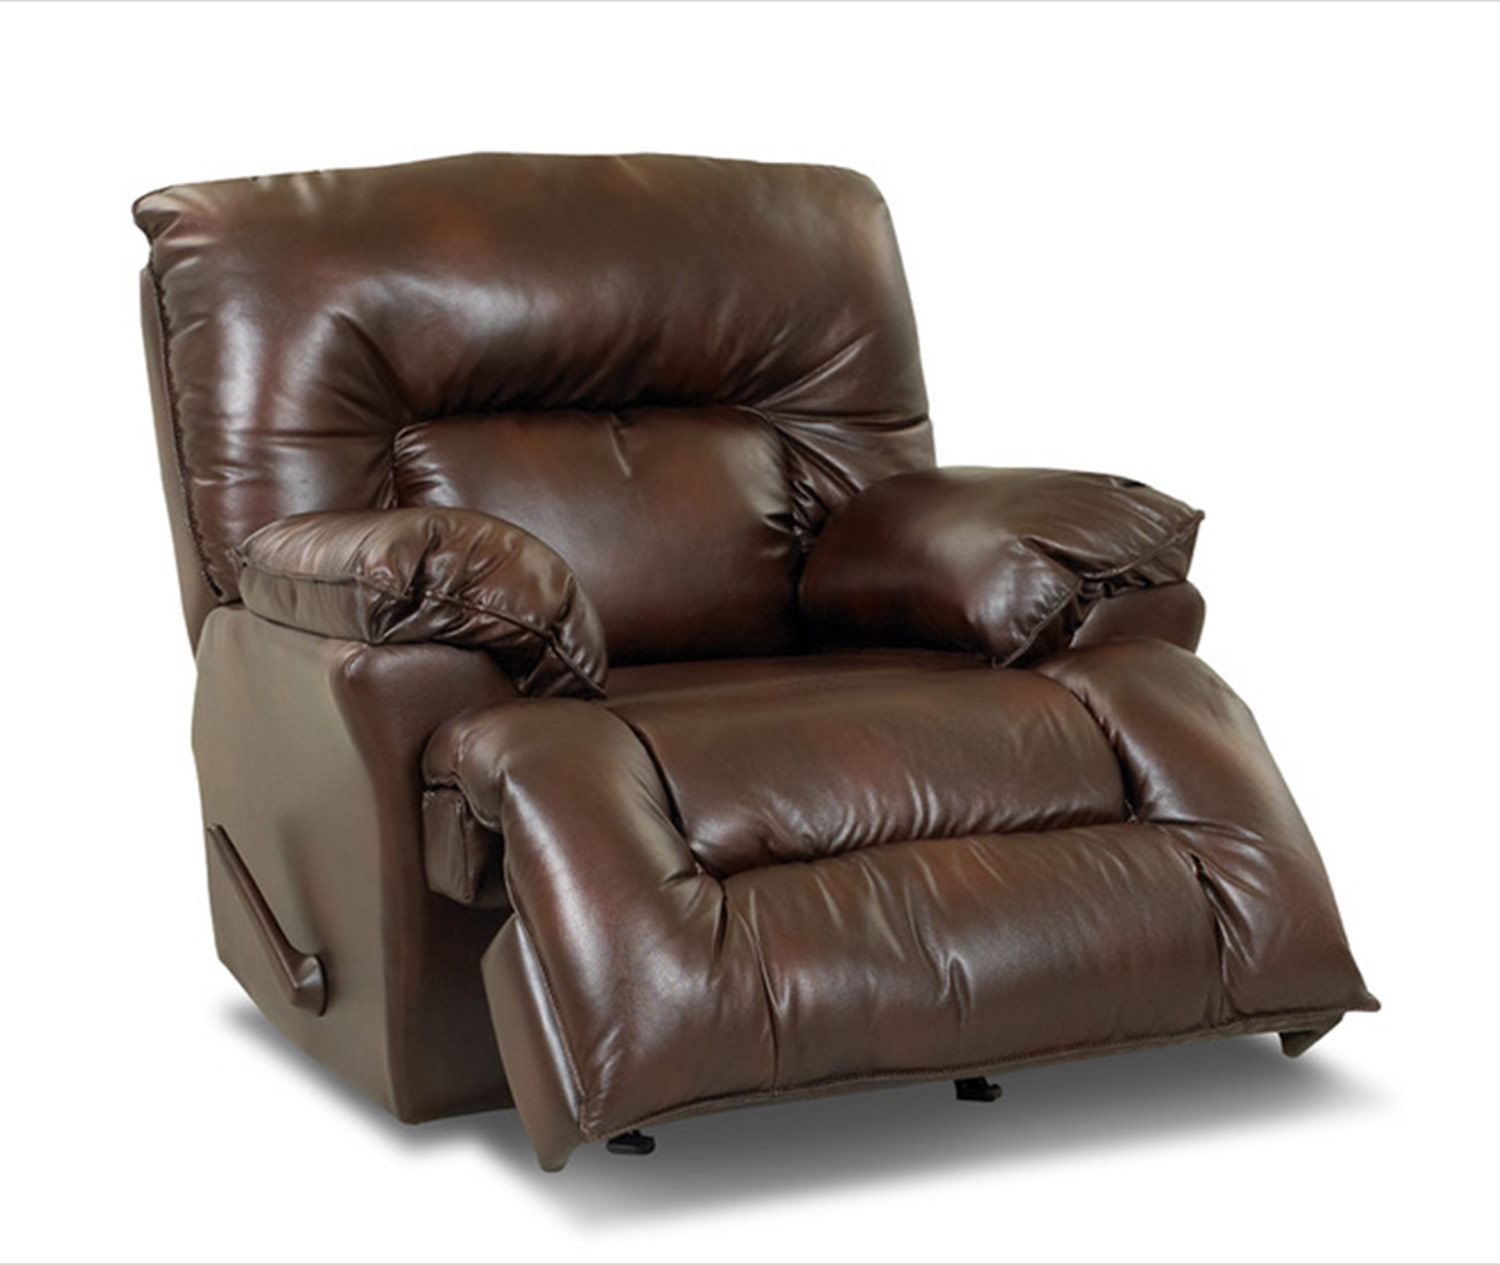 Klaussner Laramie Reclining Chair - Raleigh Tobacco